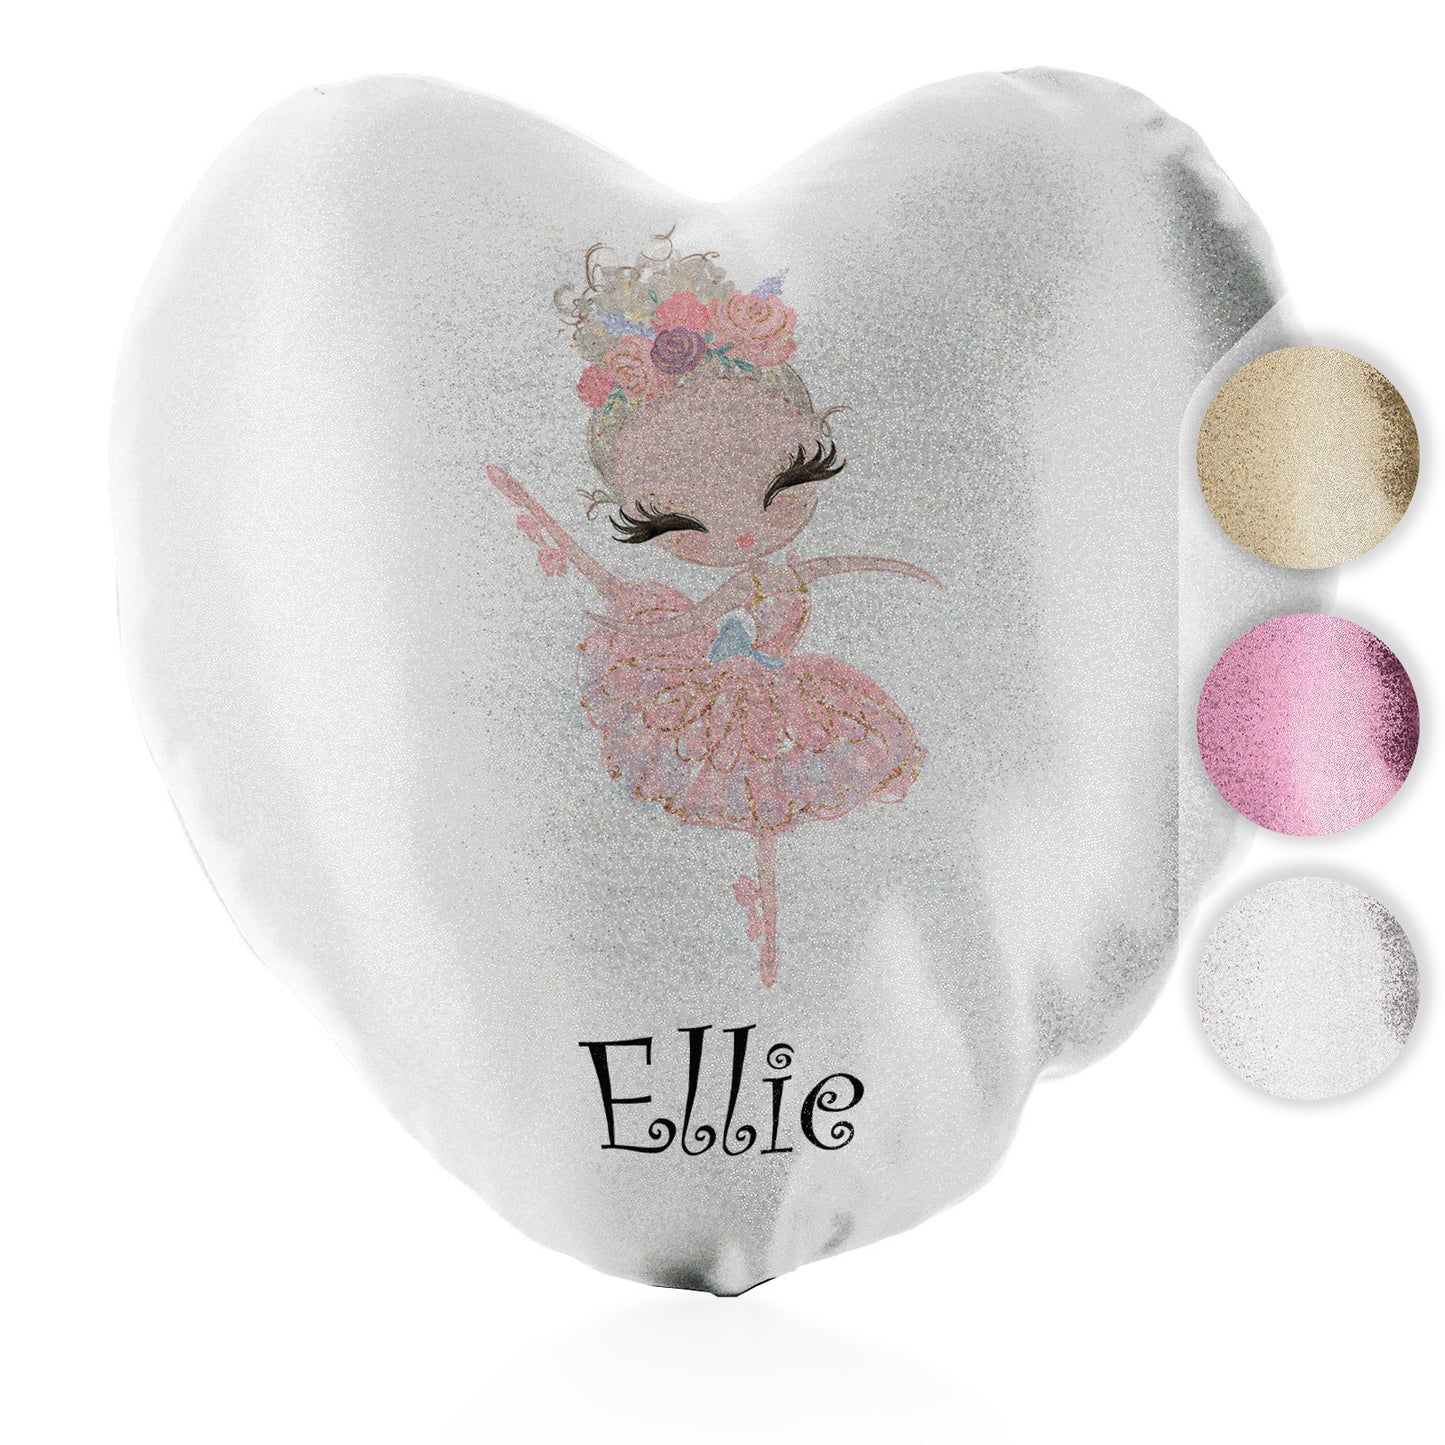 Personalised Glitter Heart Cushion with Cute Text and Blonde Hair Pink Dress Ballerina